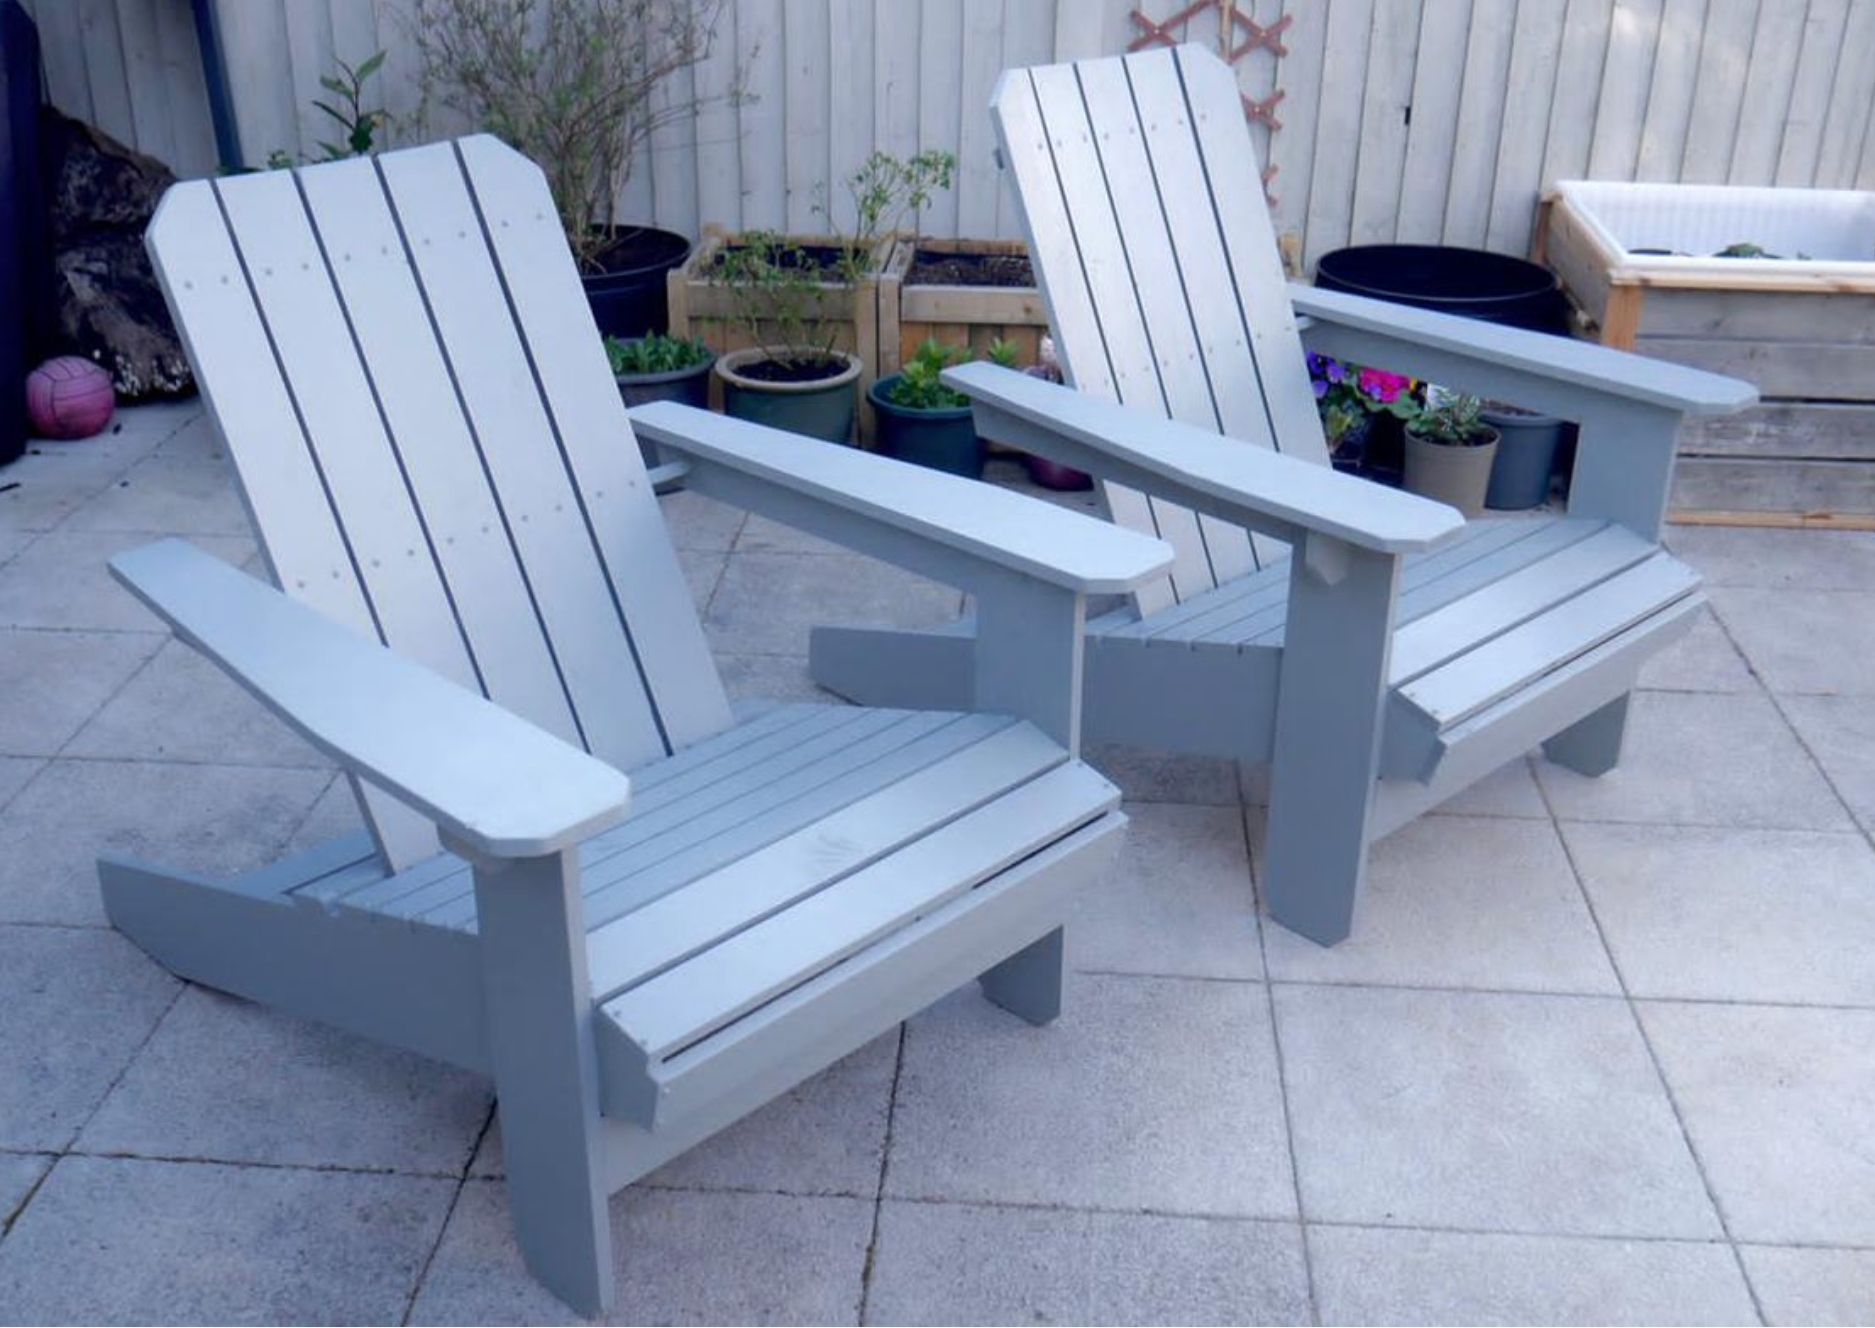 How to made an Adirondack chair